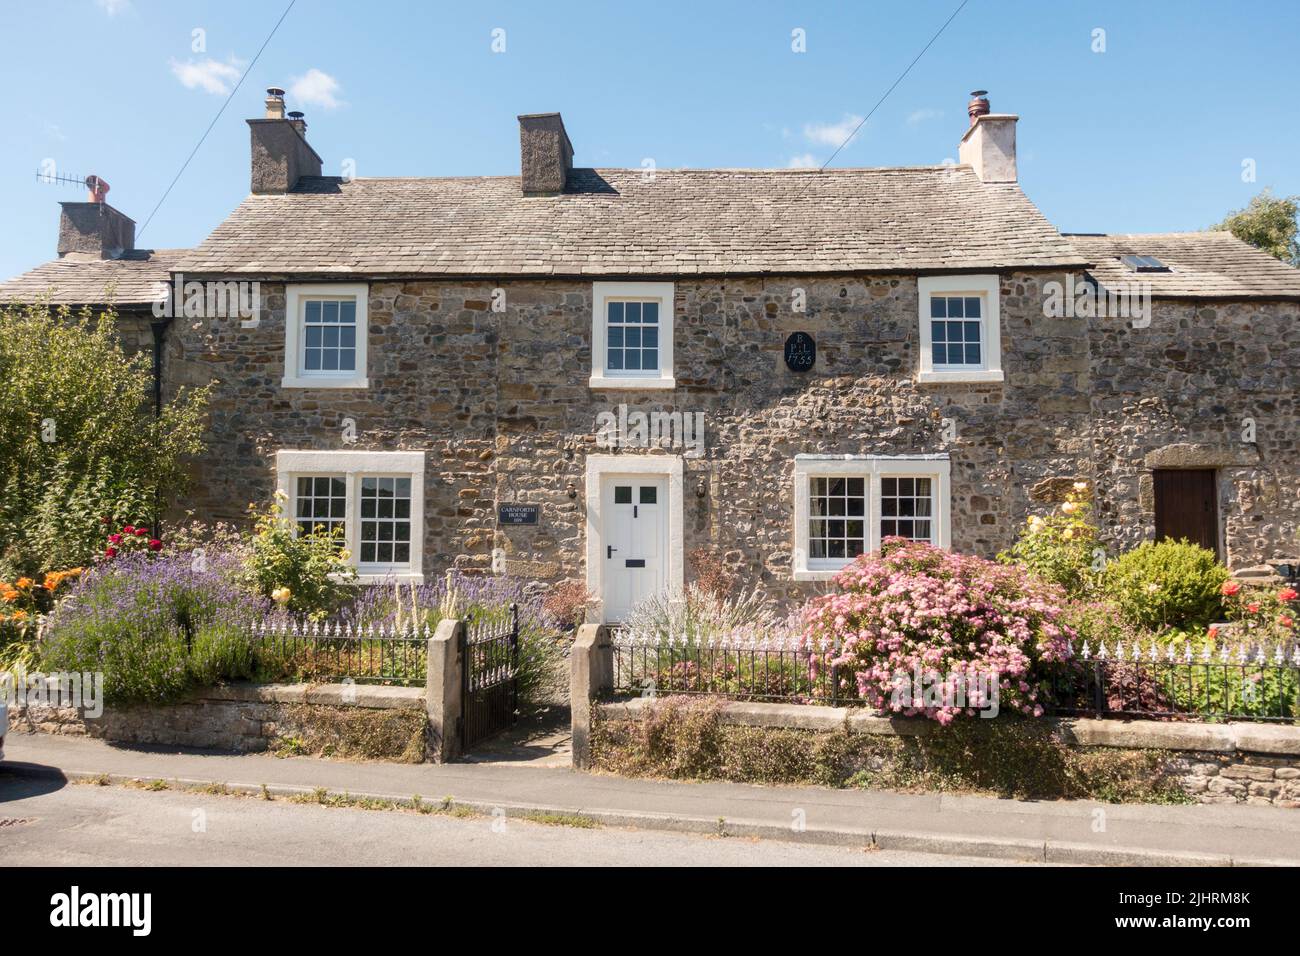 The 18th century listed stone built Carnforth House on North Road, Carnforth, Lancashire, England Stock Photo